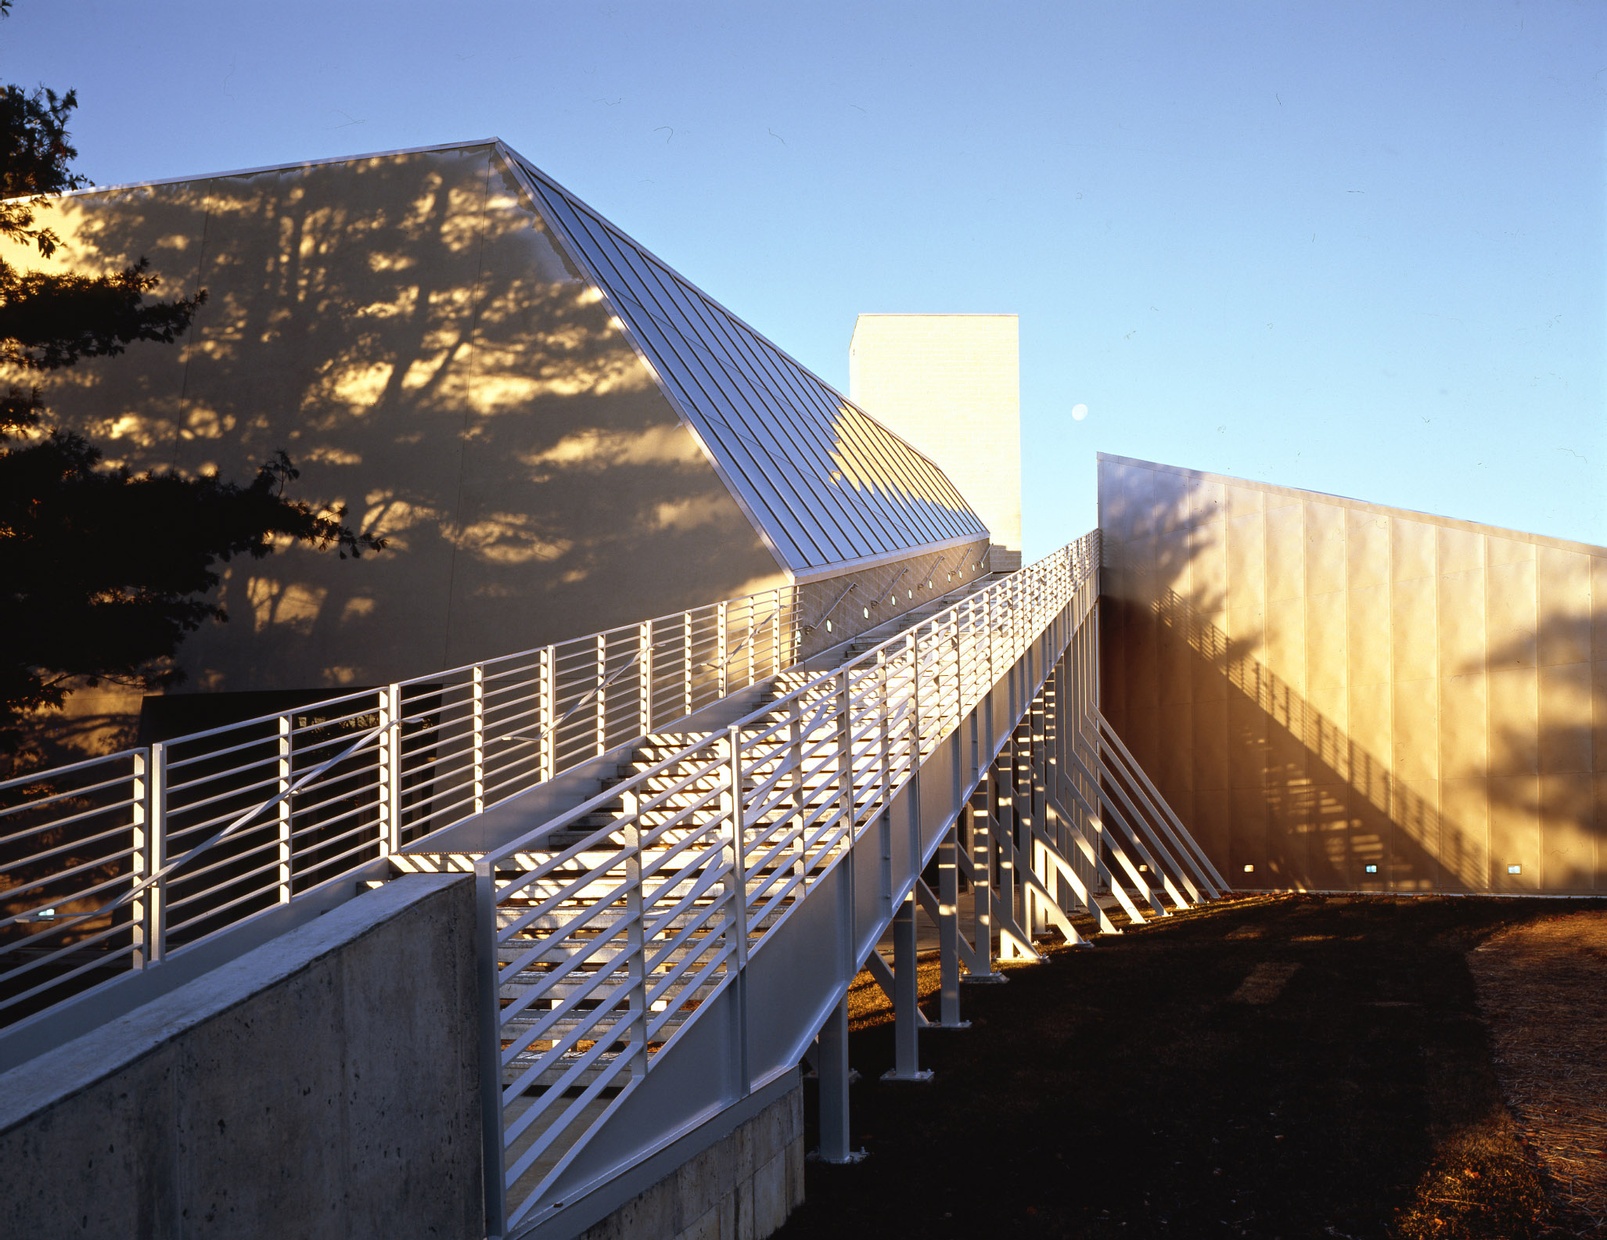 A stairwell outside the museum building in early morning light.